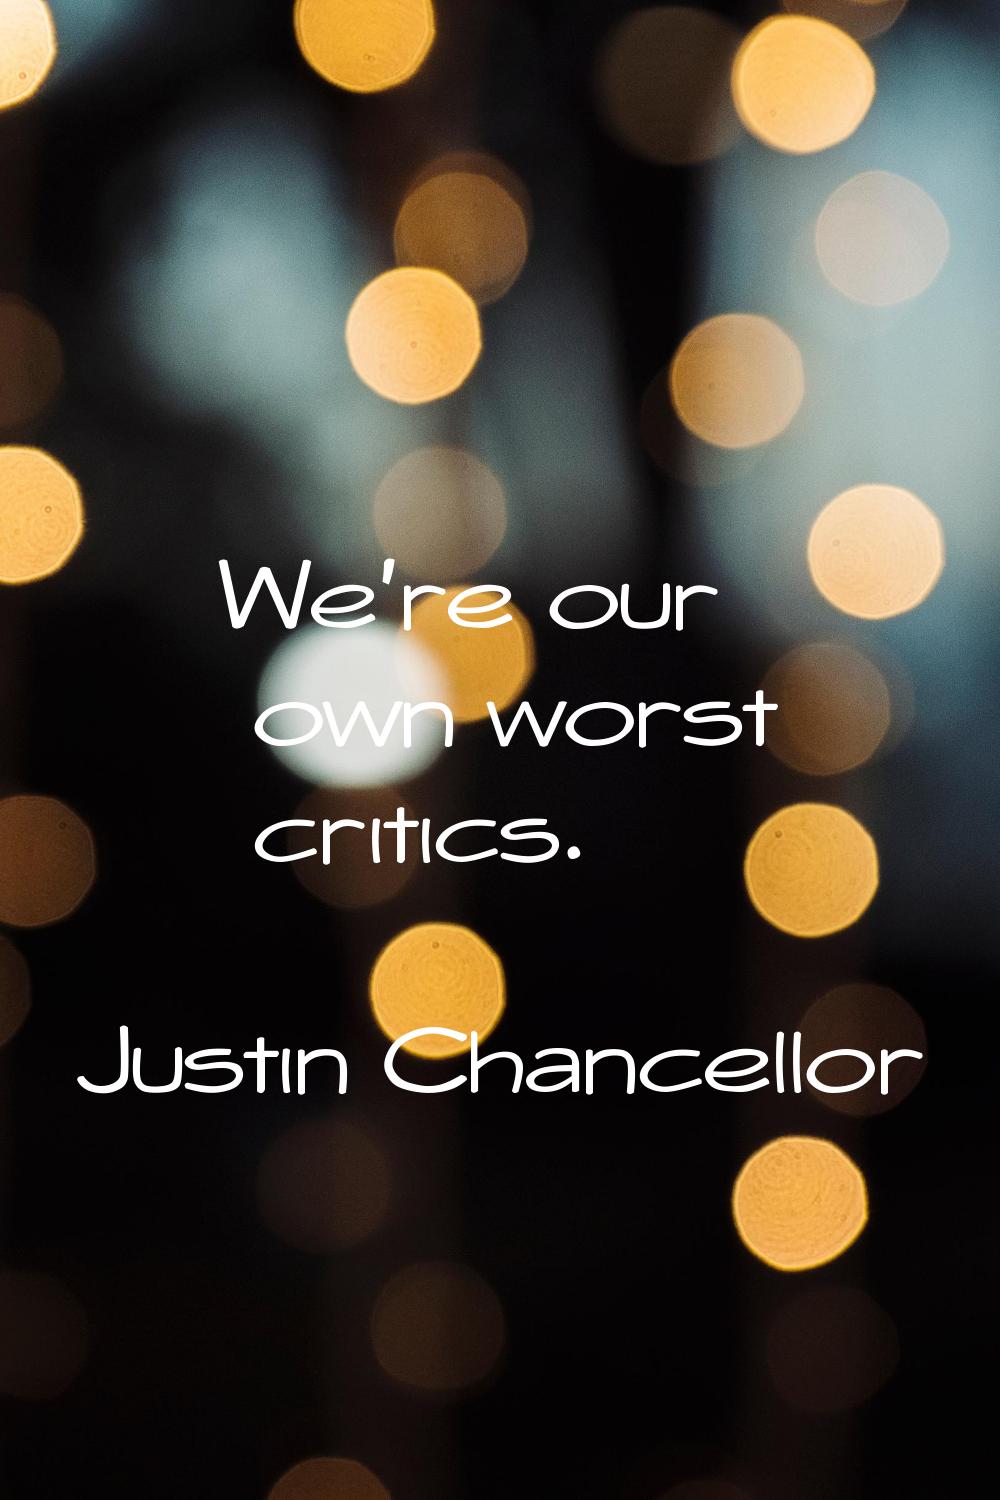 We're our own worst critics.